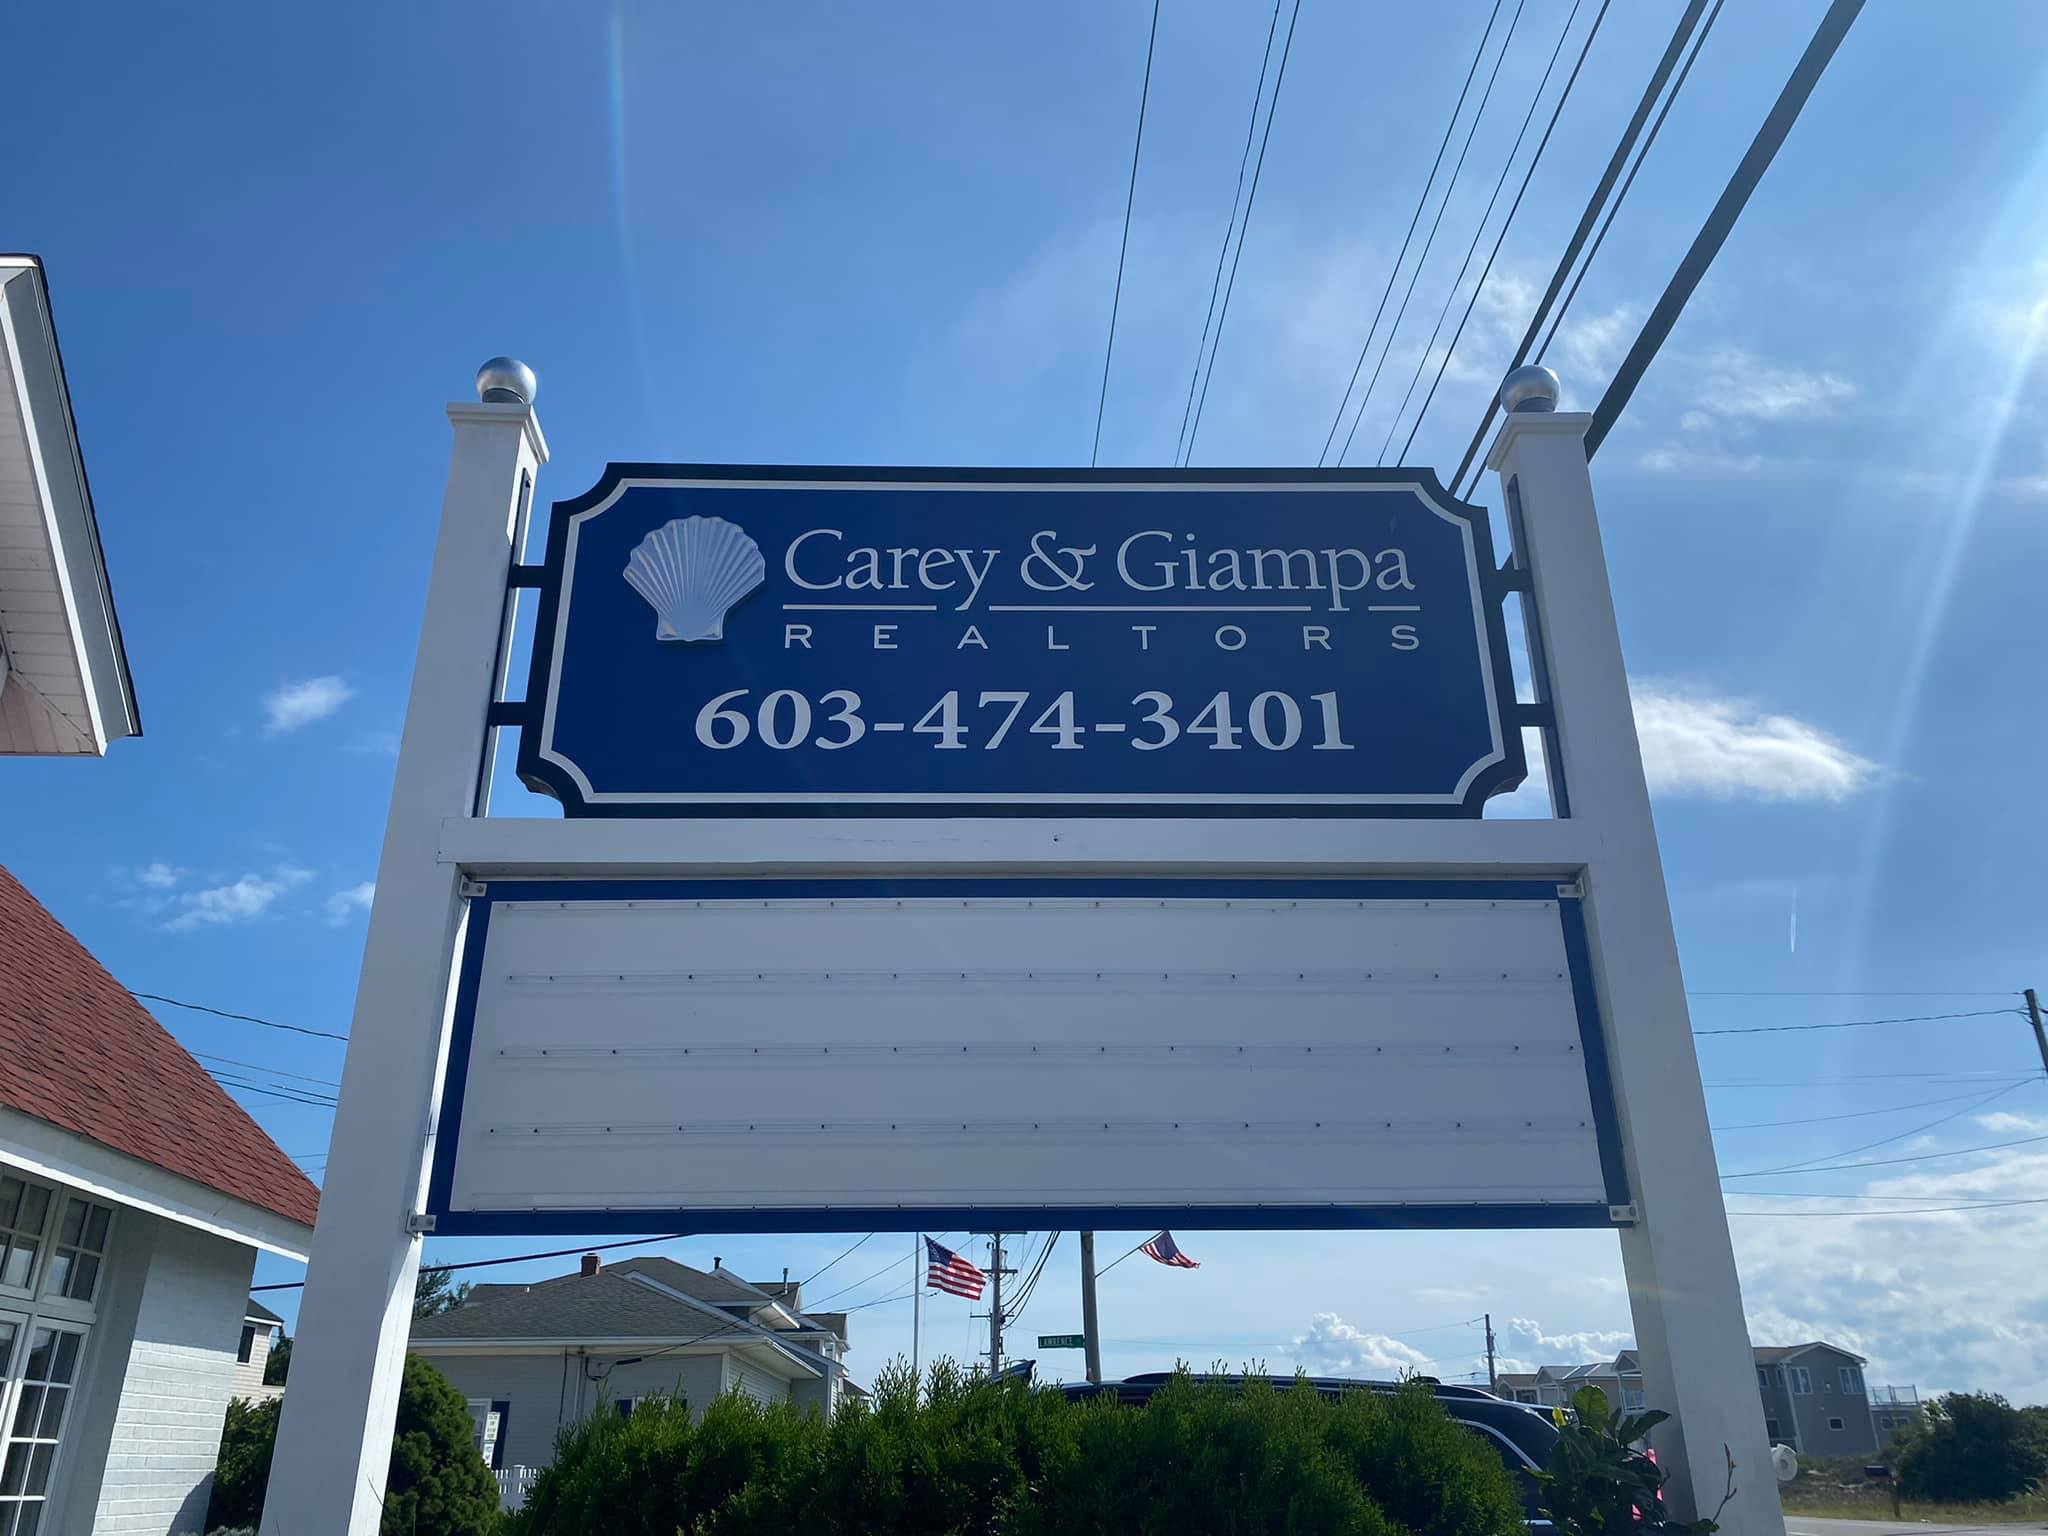 Carey and Giampa Sign Case Study